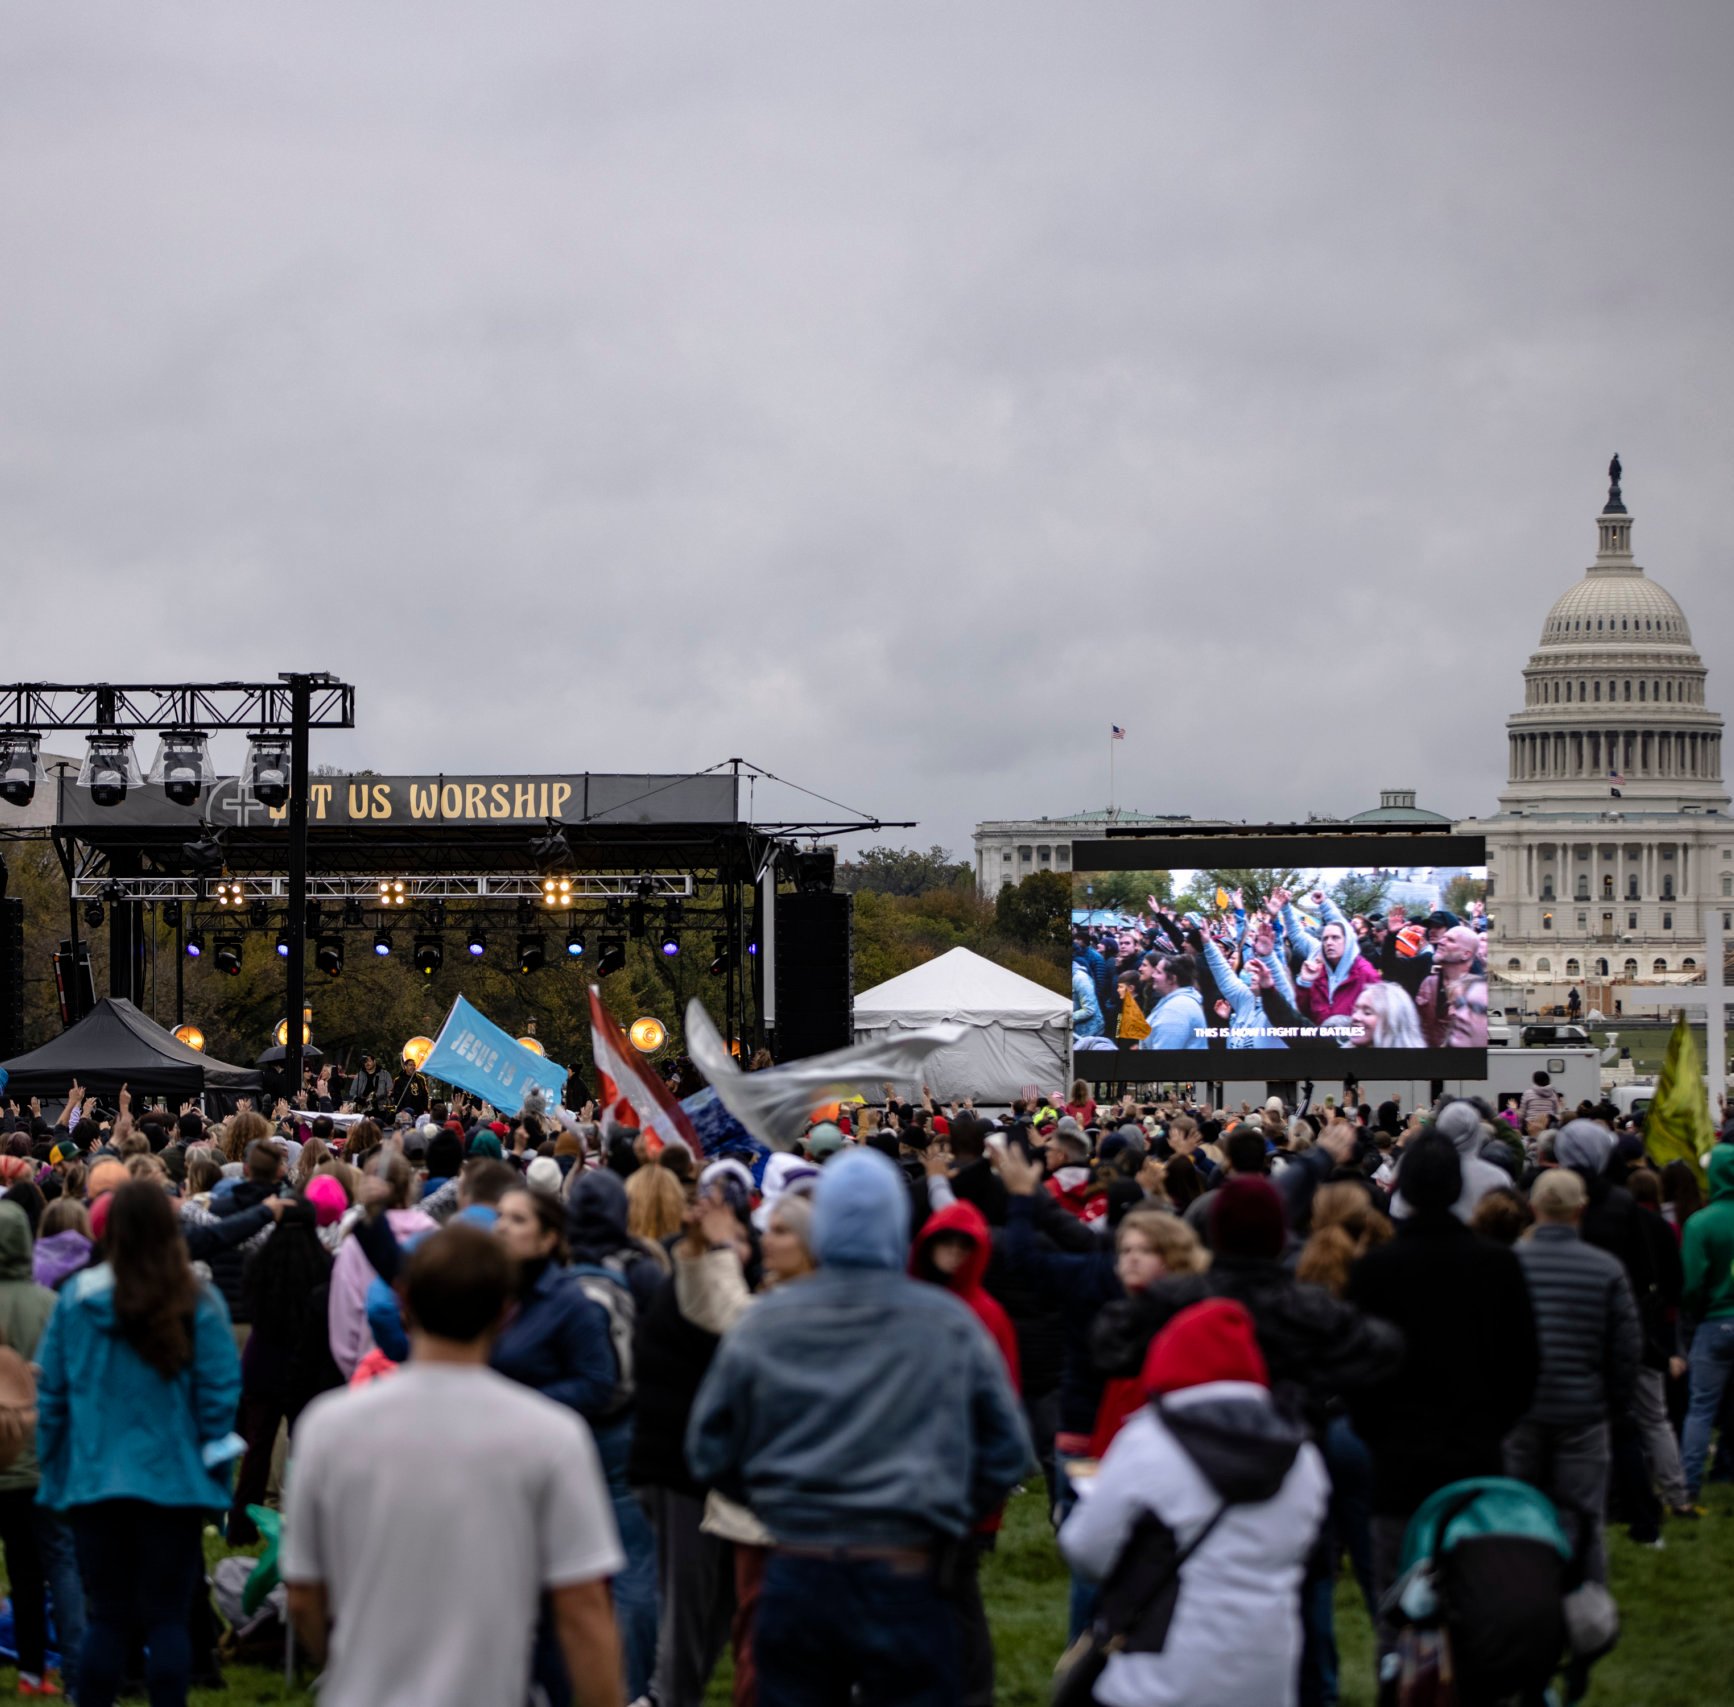 THOUSANDS COME TOGETHER TO WORSHIP IN DC - Intercessors for America